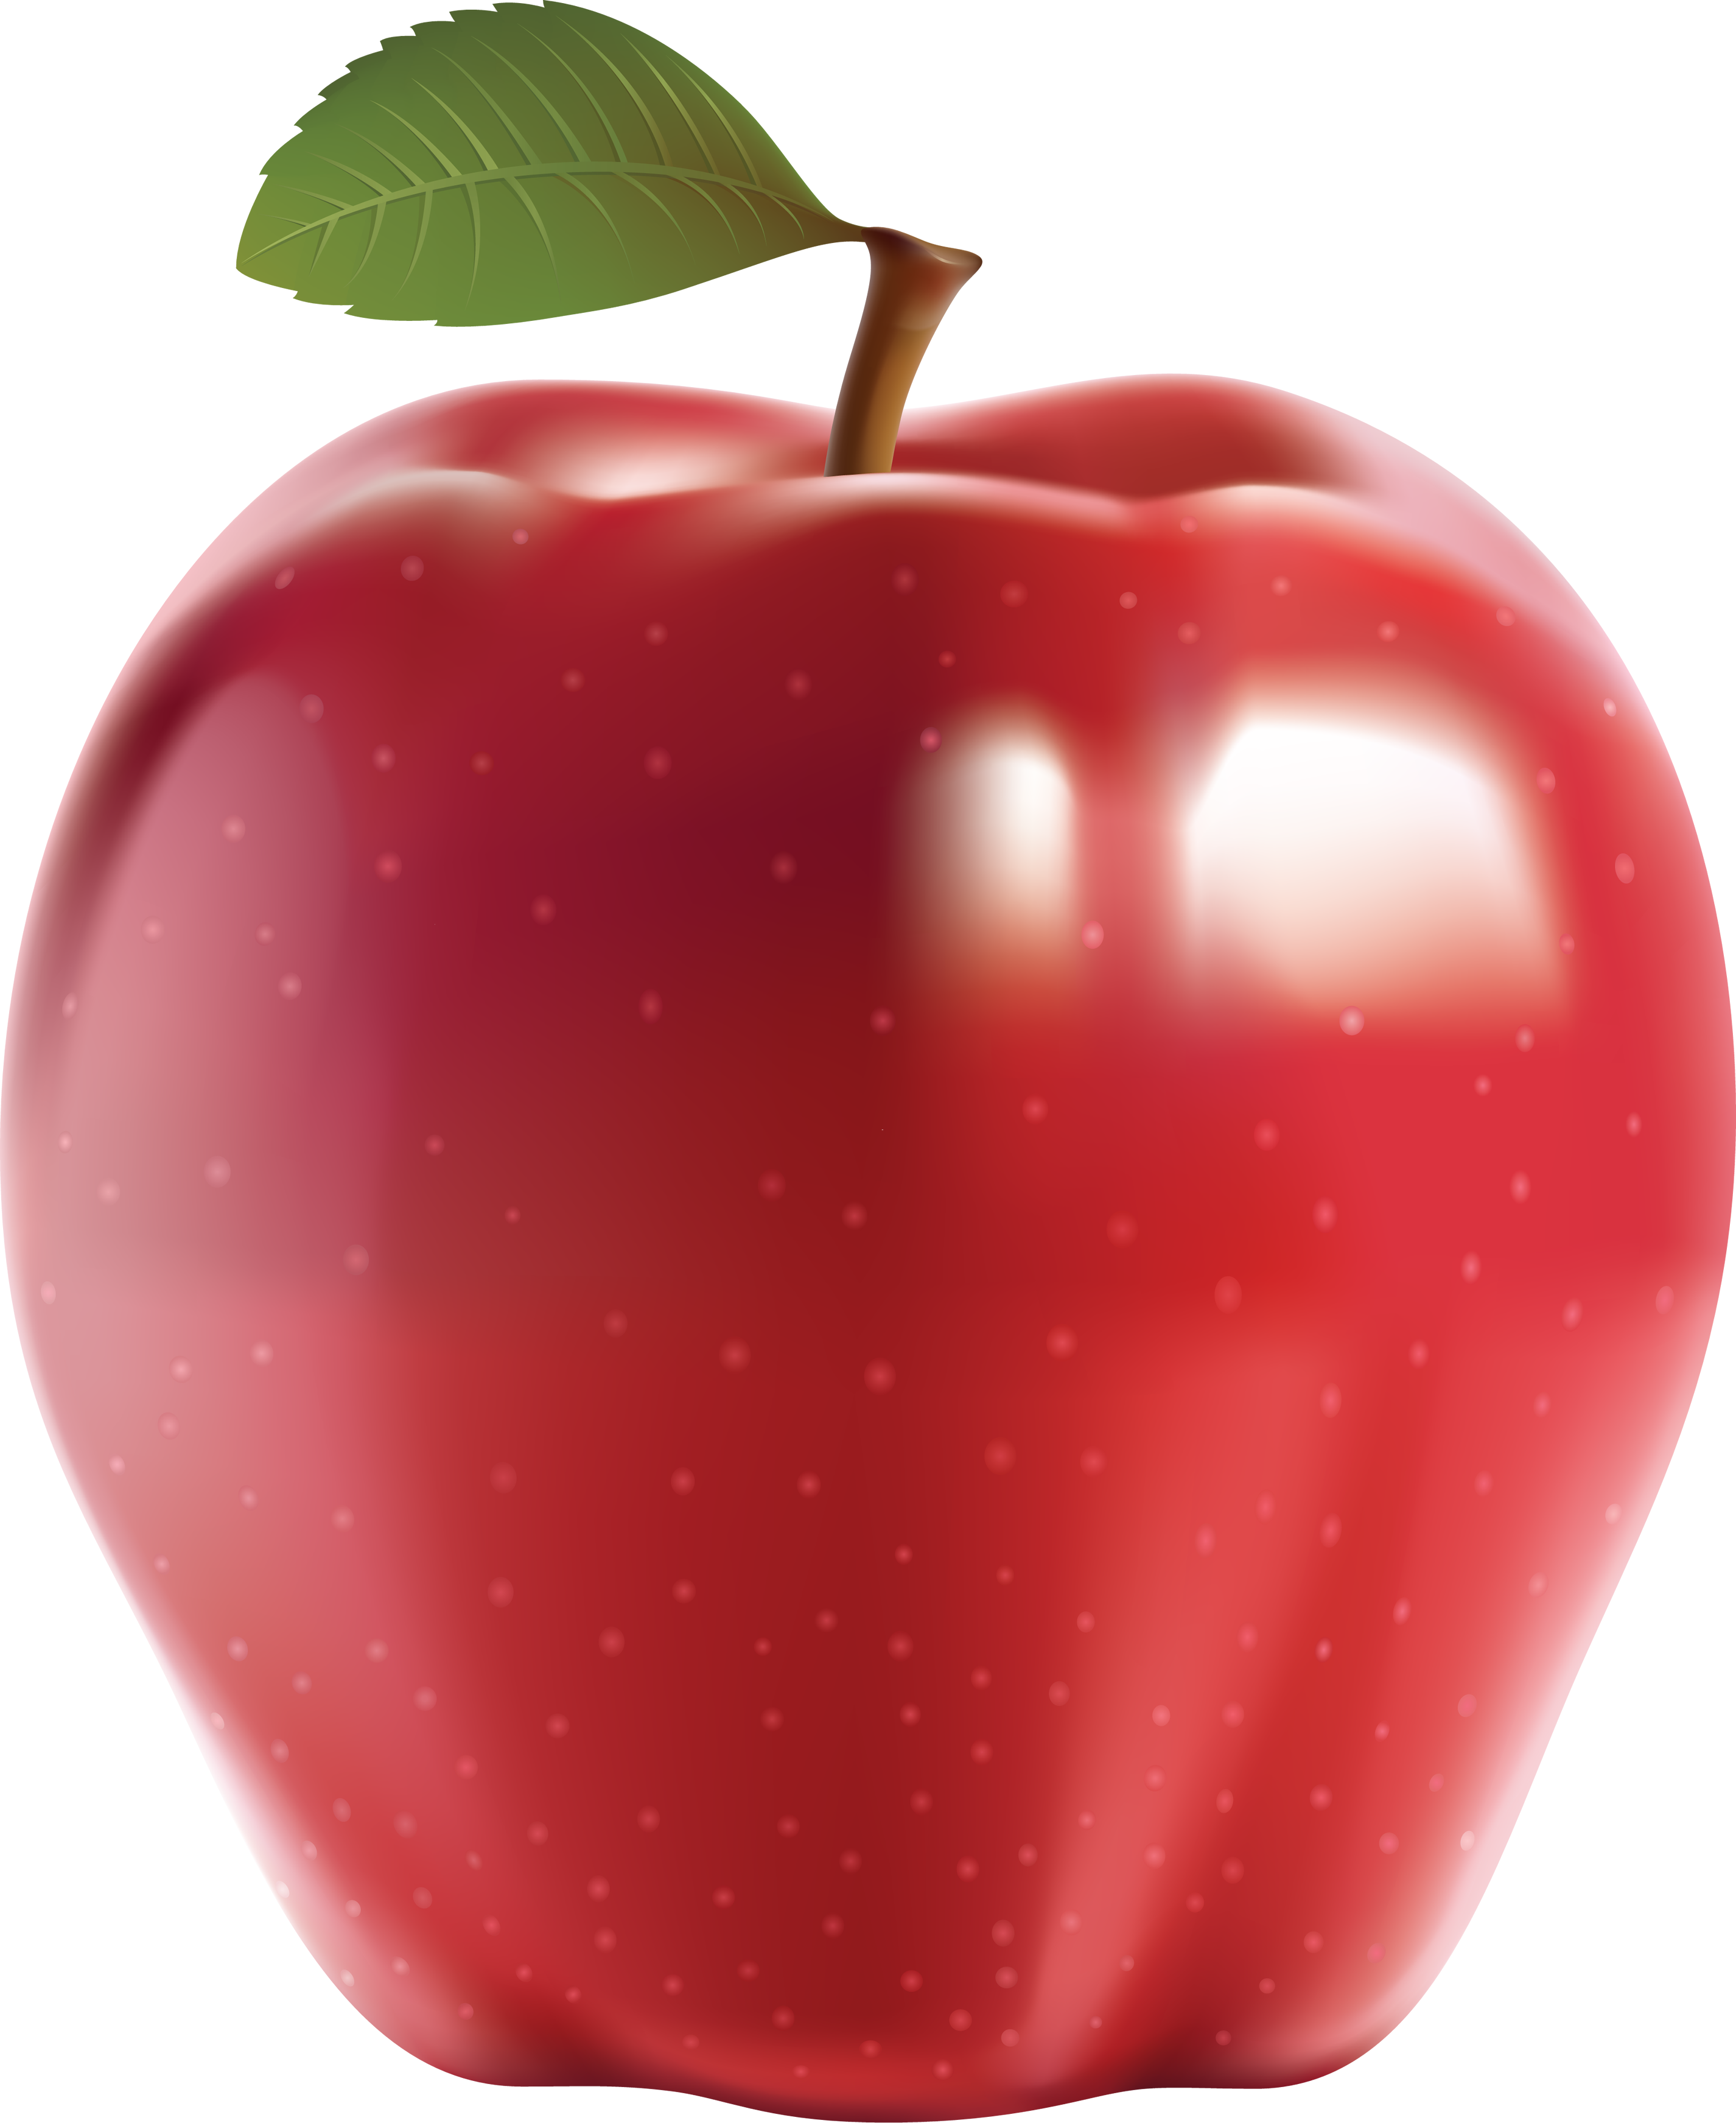 Download PNG image: Red apple PNG image